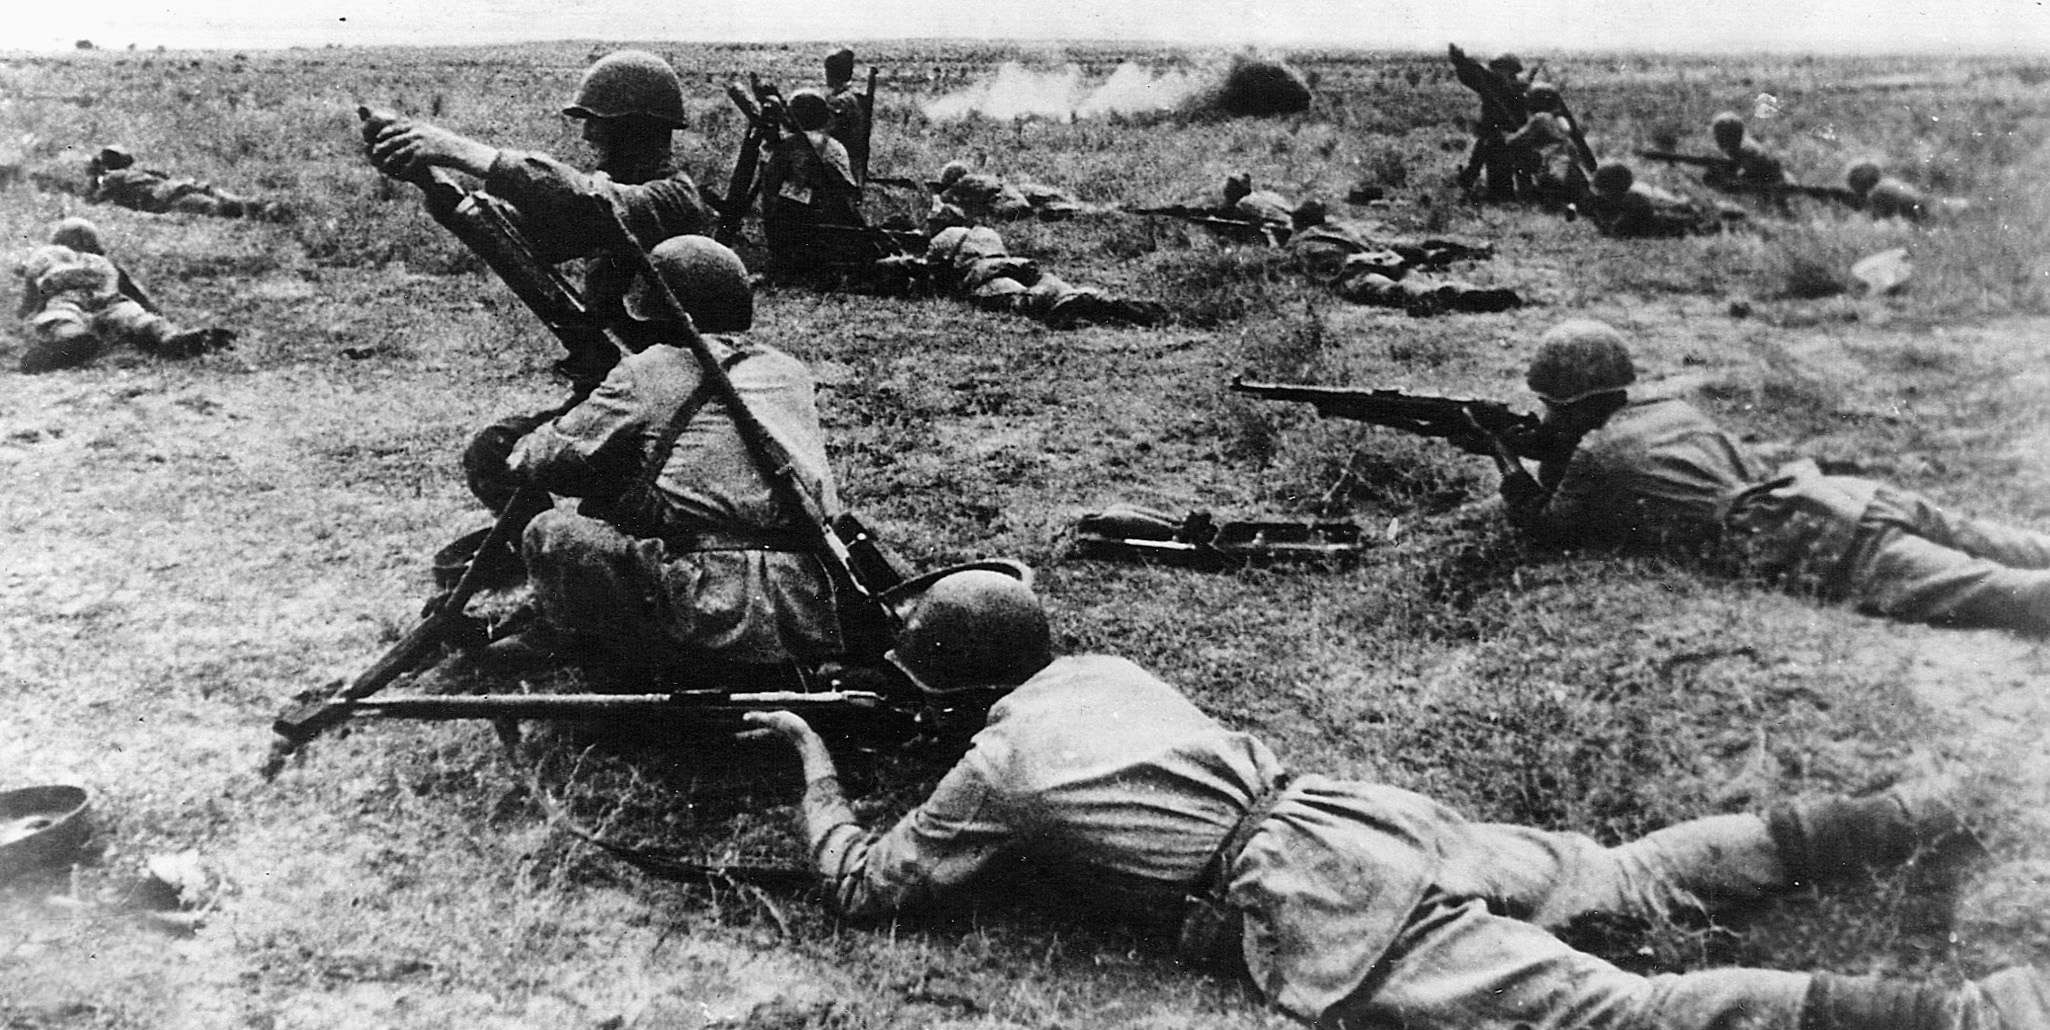 Two Red Army soldiers fire a mortar round as others lay low. Soviet infantry, which many Germans regarded with disdain early in the war, grudgingly gained their respect during the winter offensive of 1941-42.